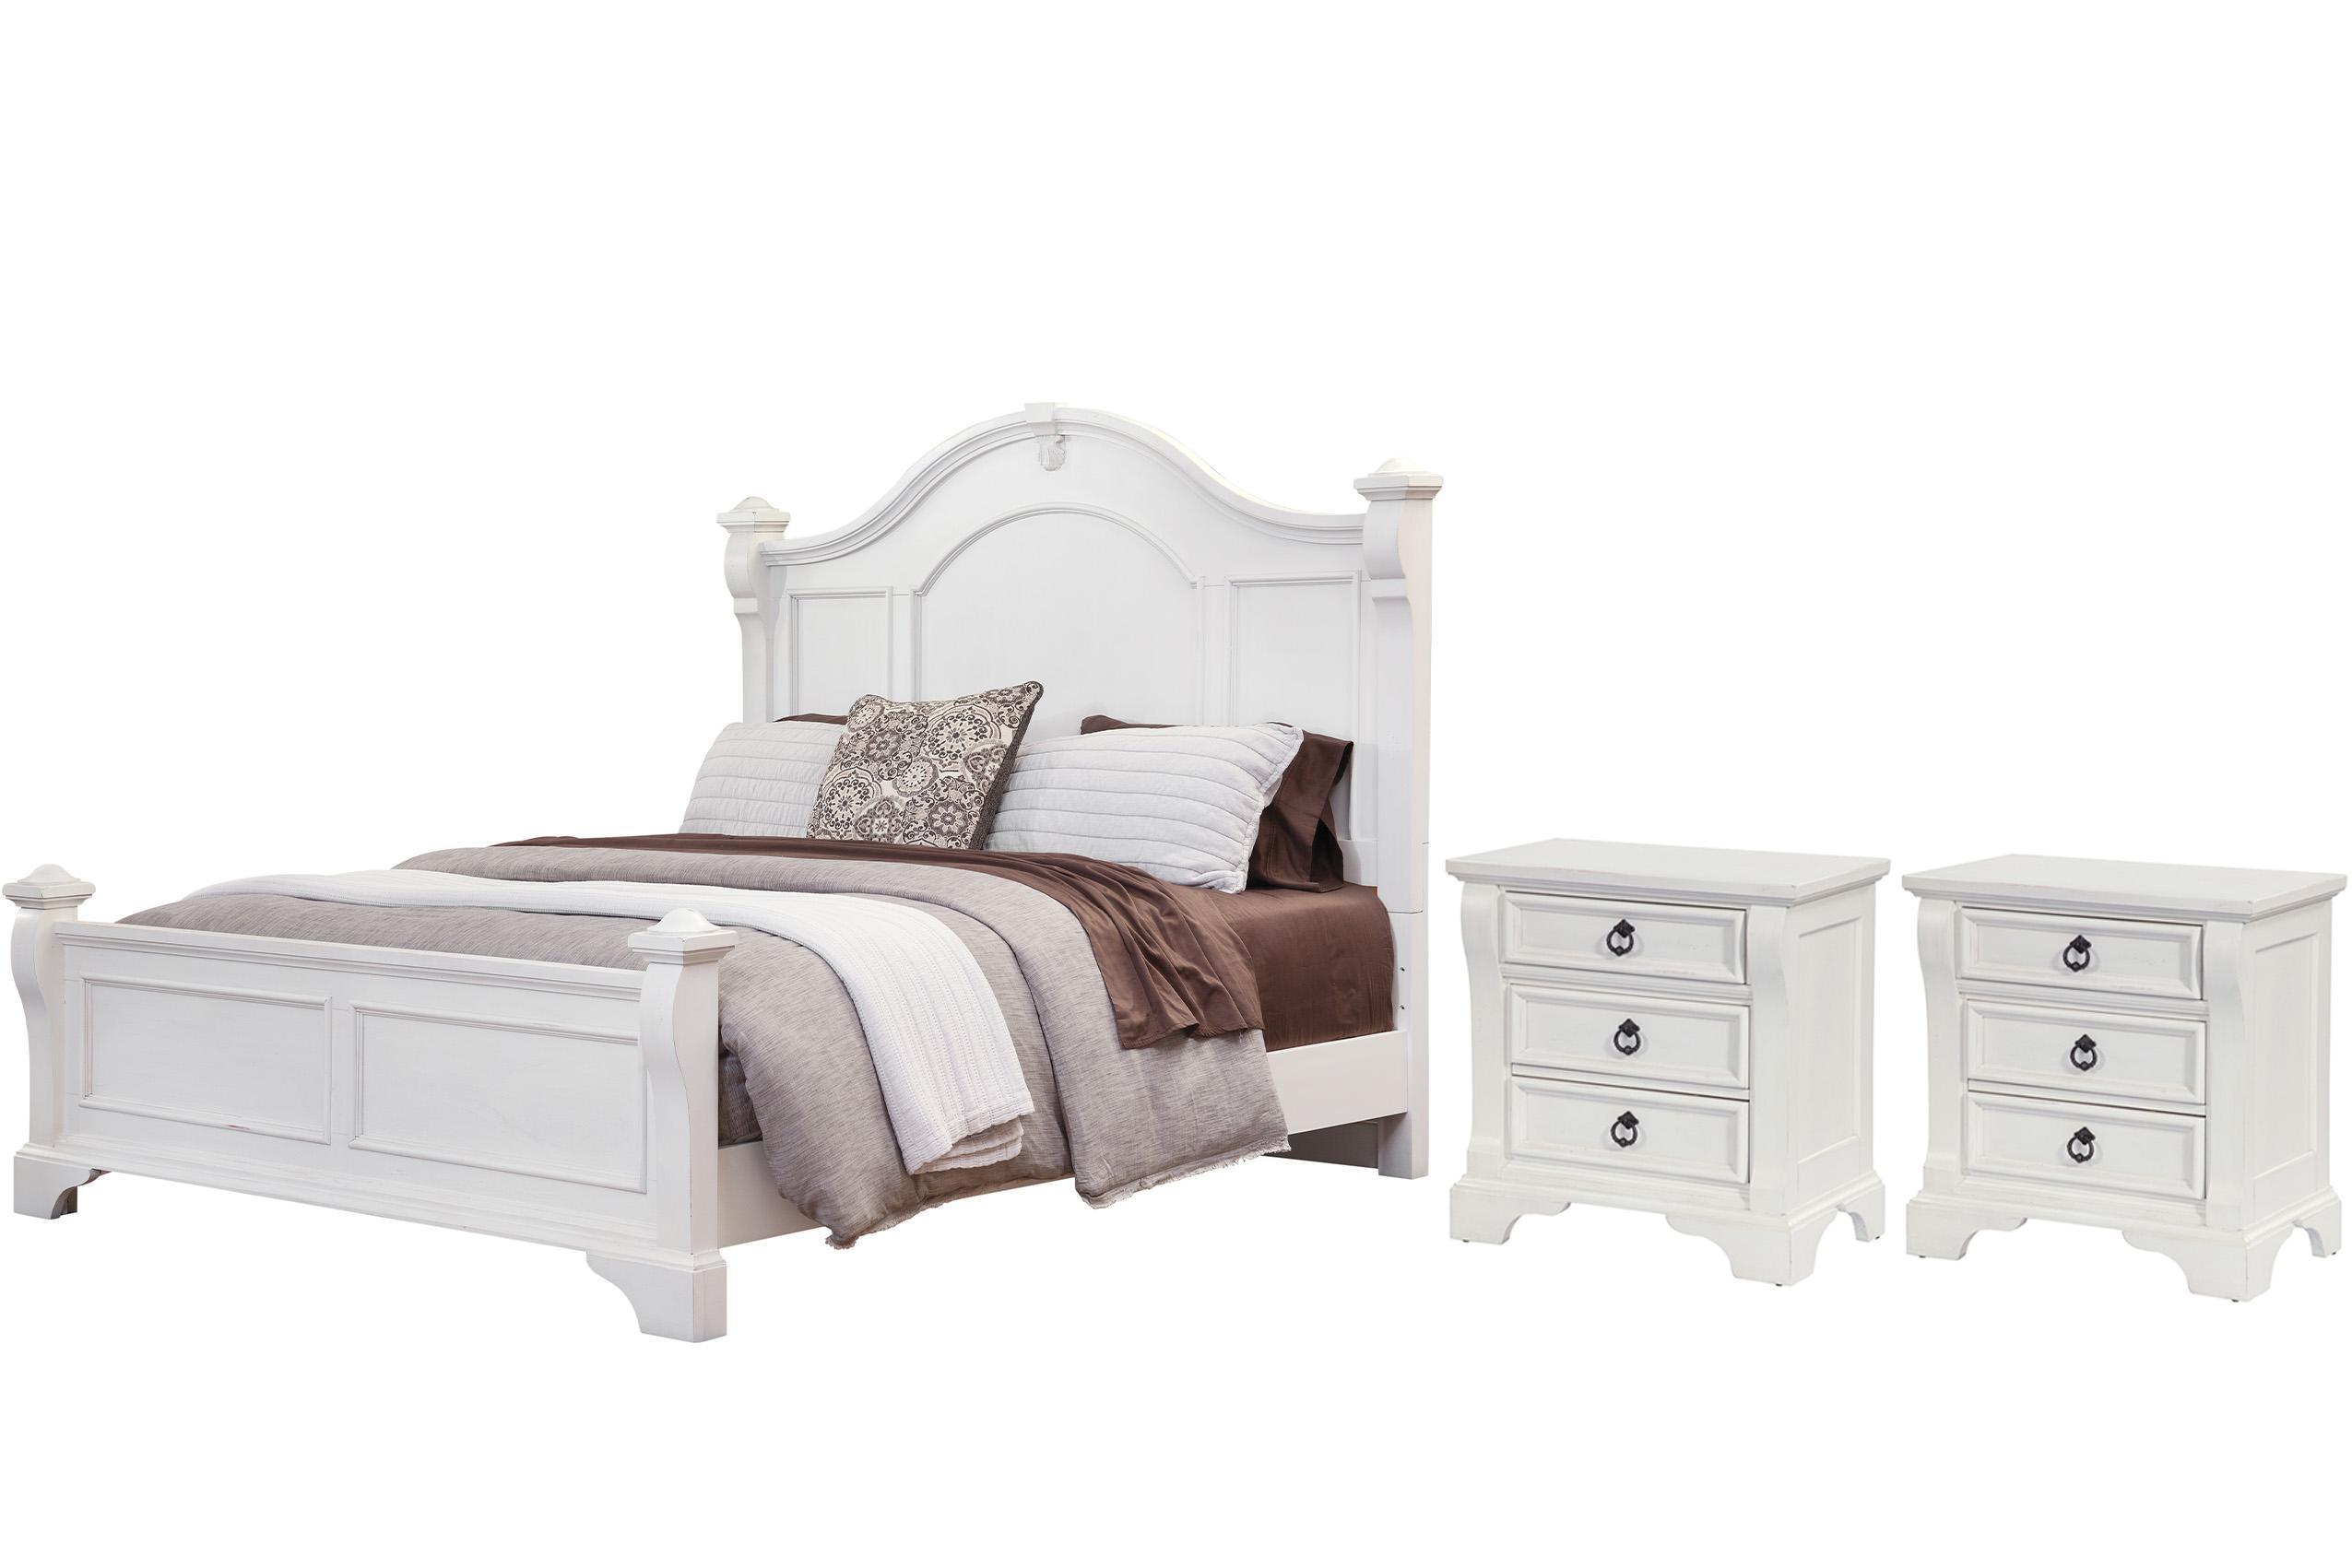 Classic, Traditional, Cottage Poster Bedroom Set HEIRLOOM 2910-50POS 2910-50POS-2N-3PC in White 